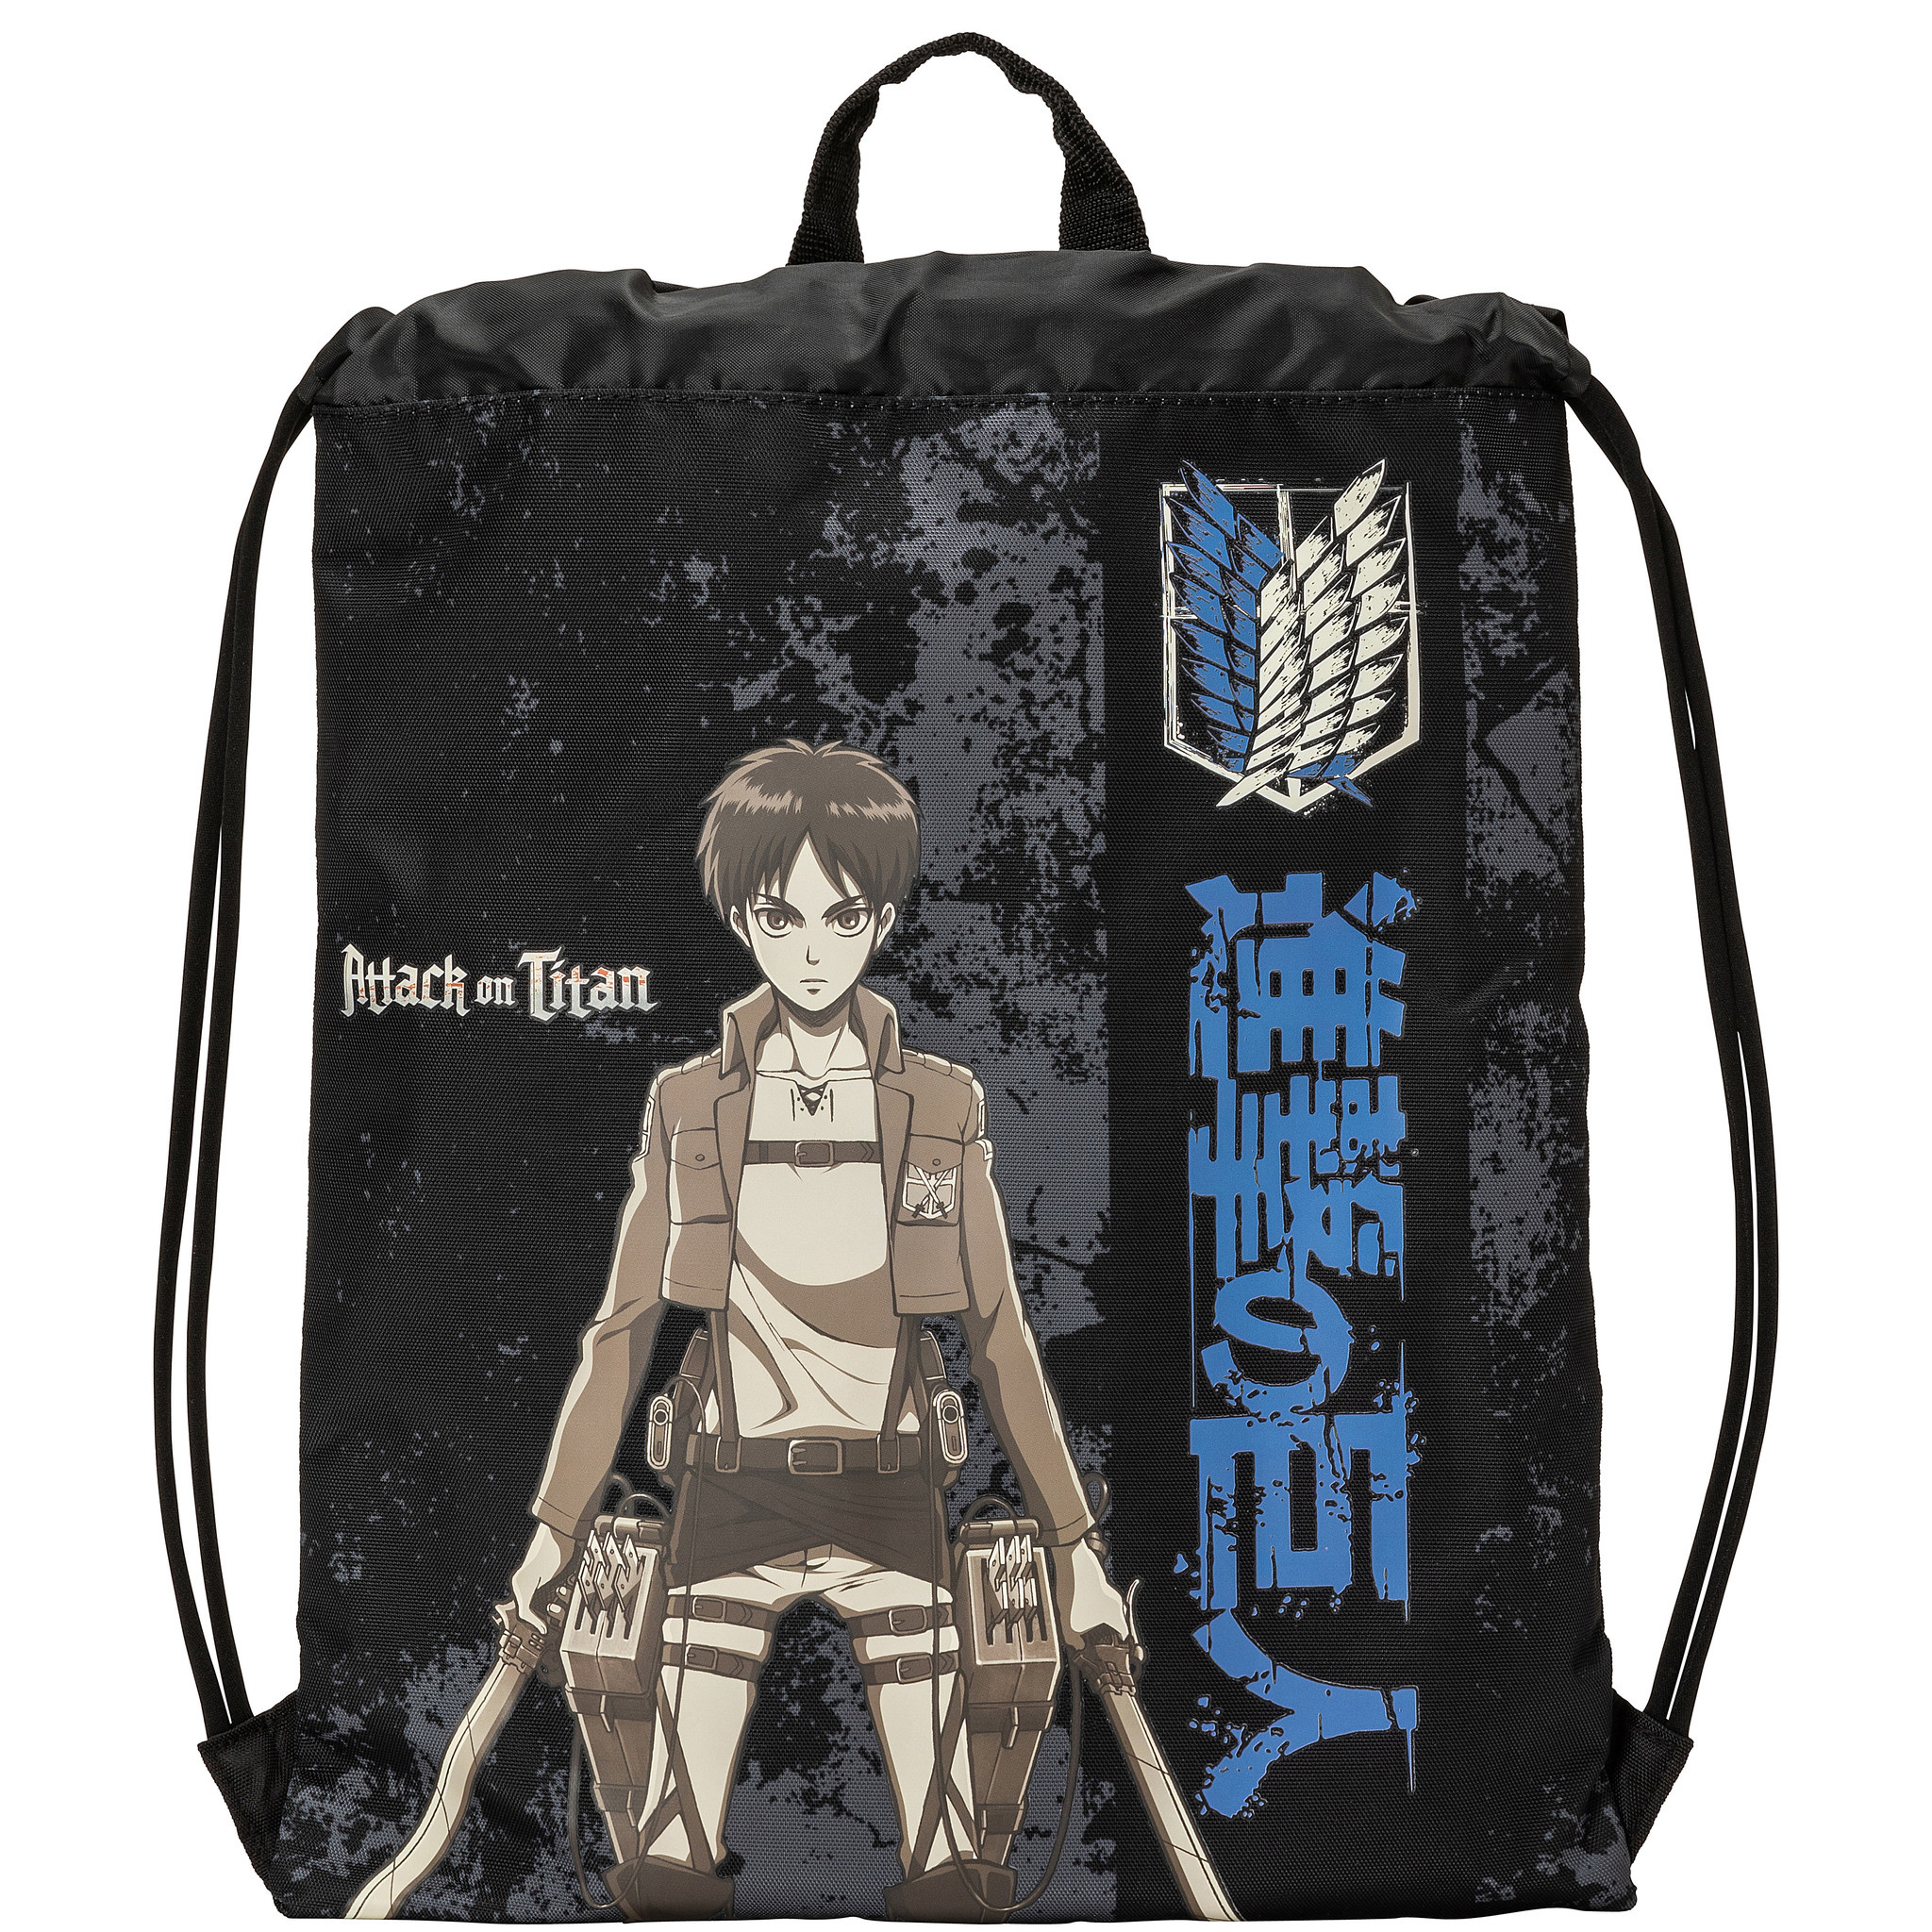 Comix Gymbag Attack on Titan - 42 x 34 cm - Polyester